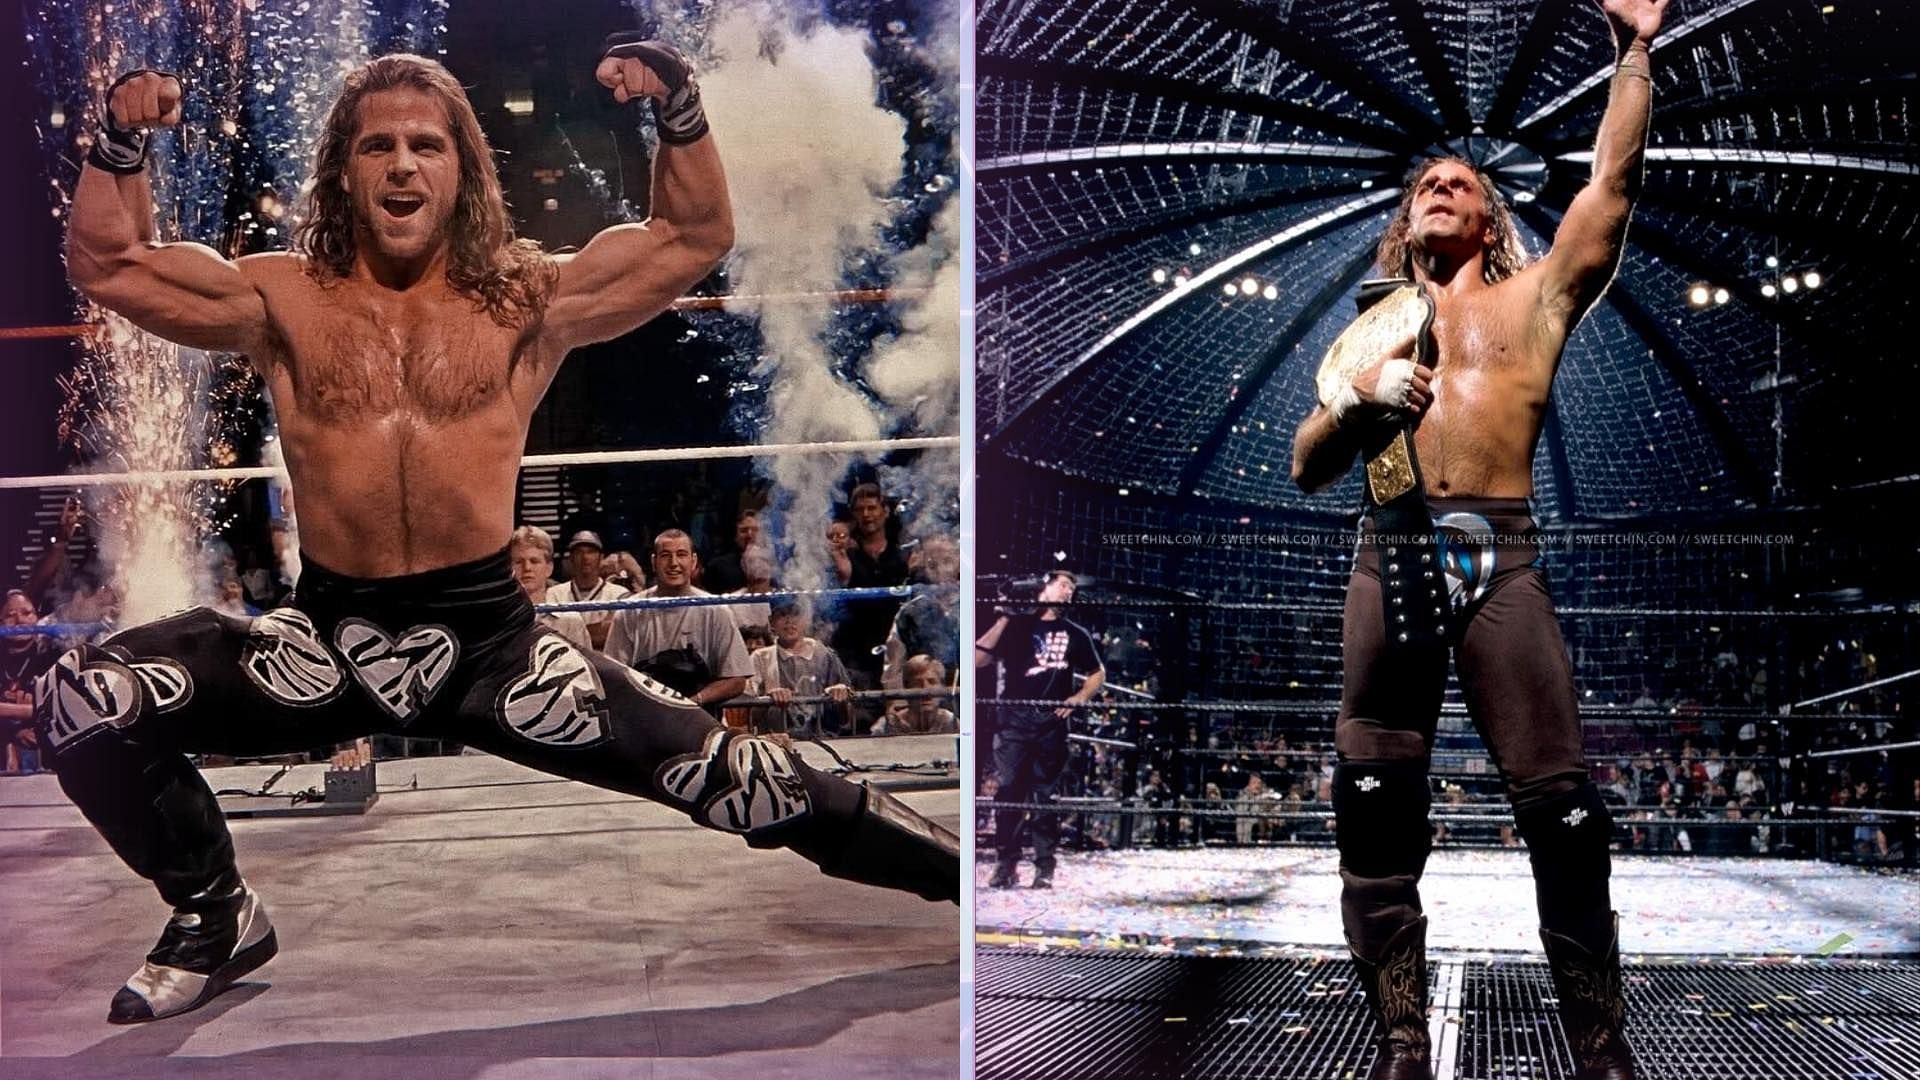 Shawn Michaels is one of the greatest of all time